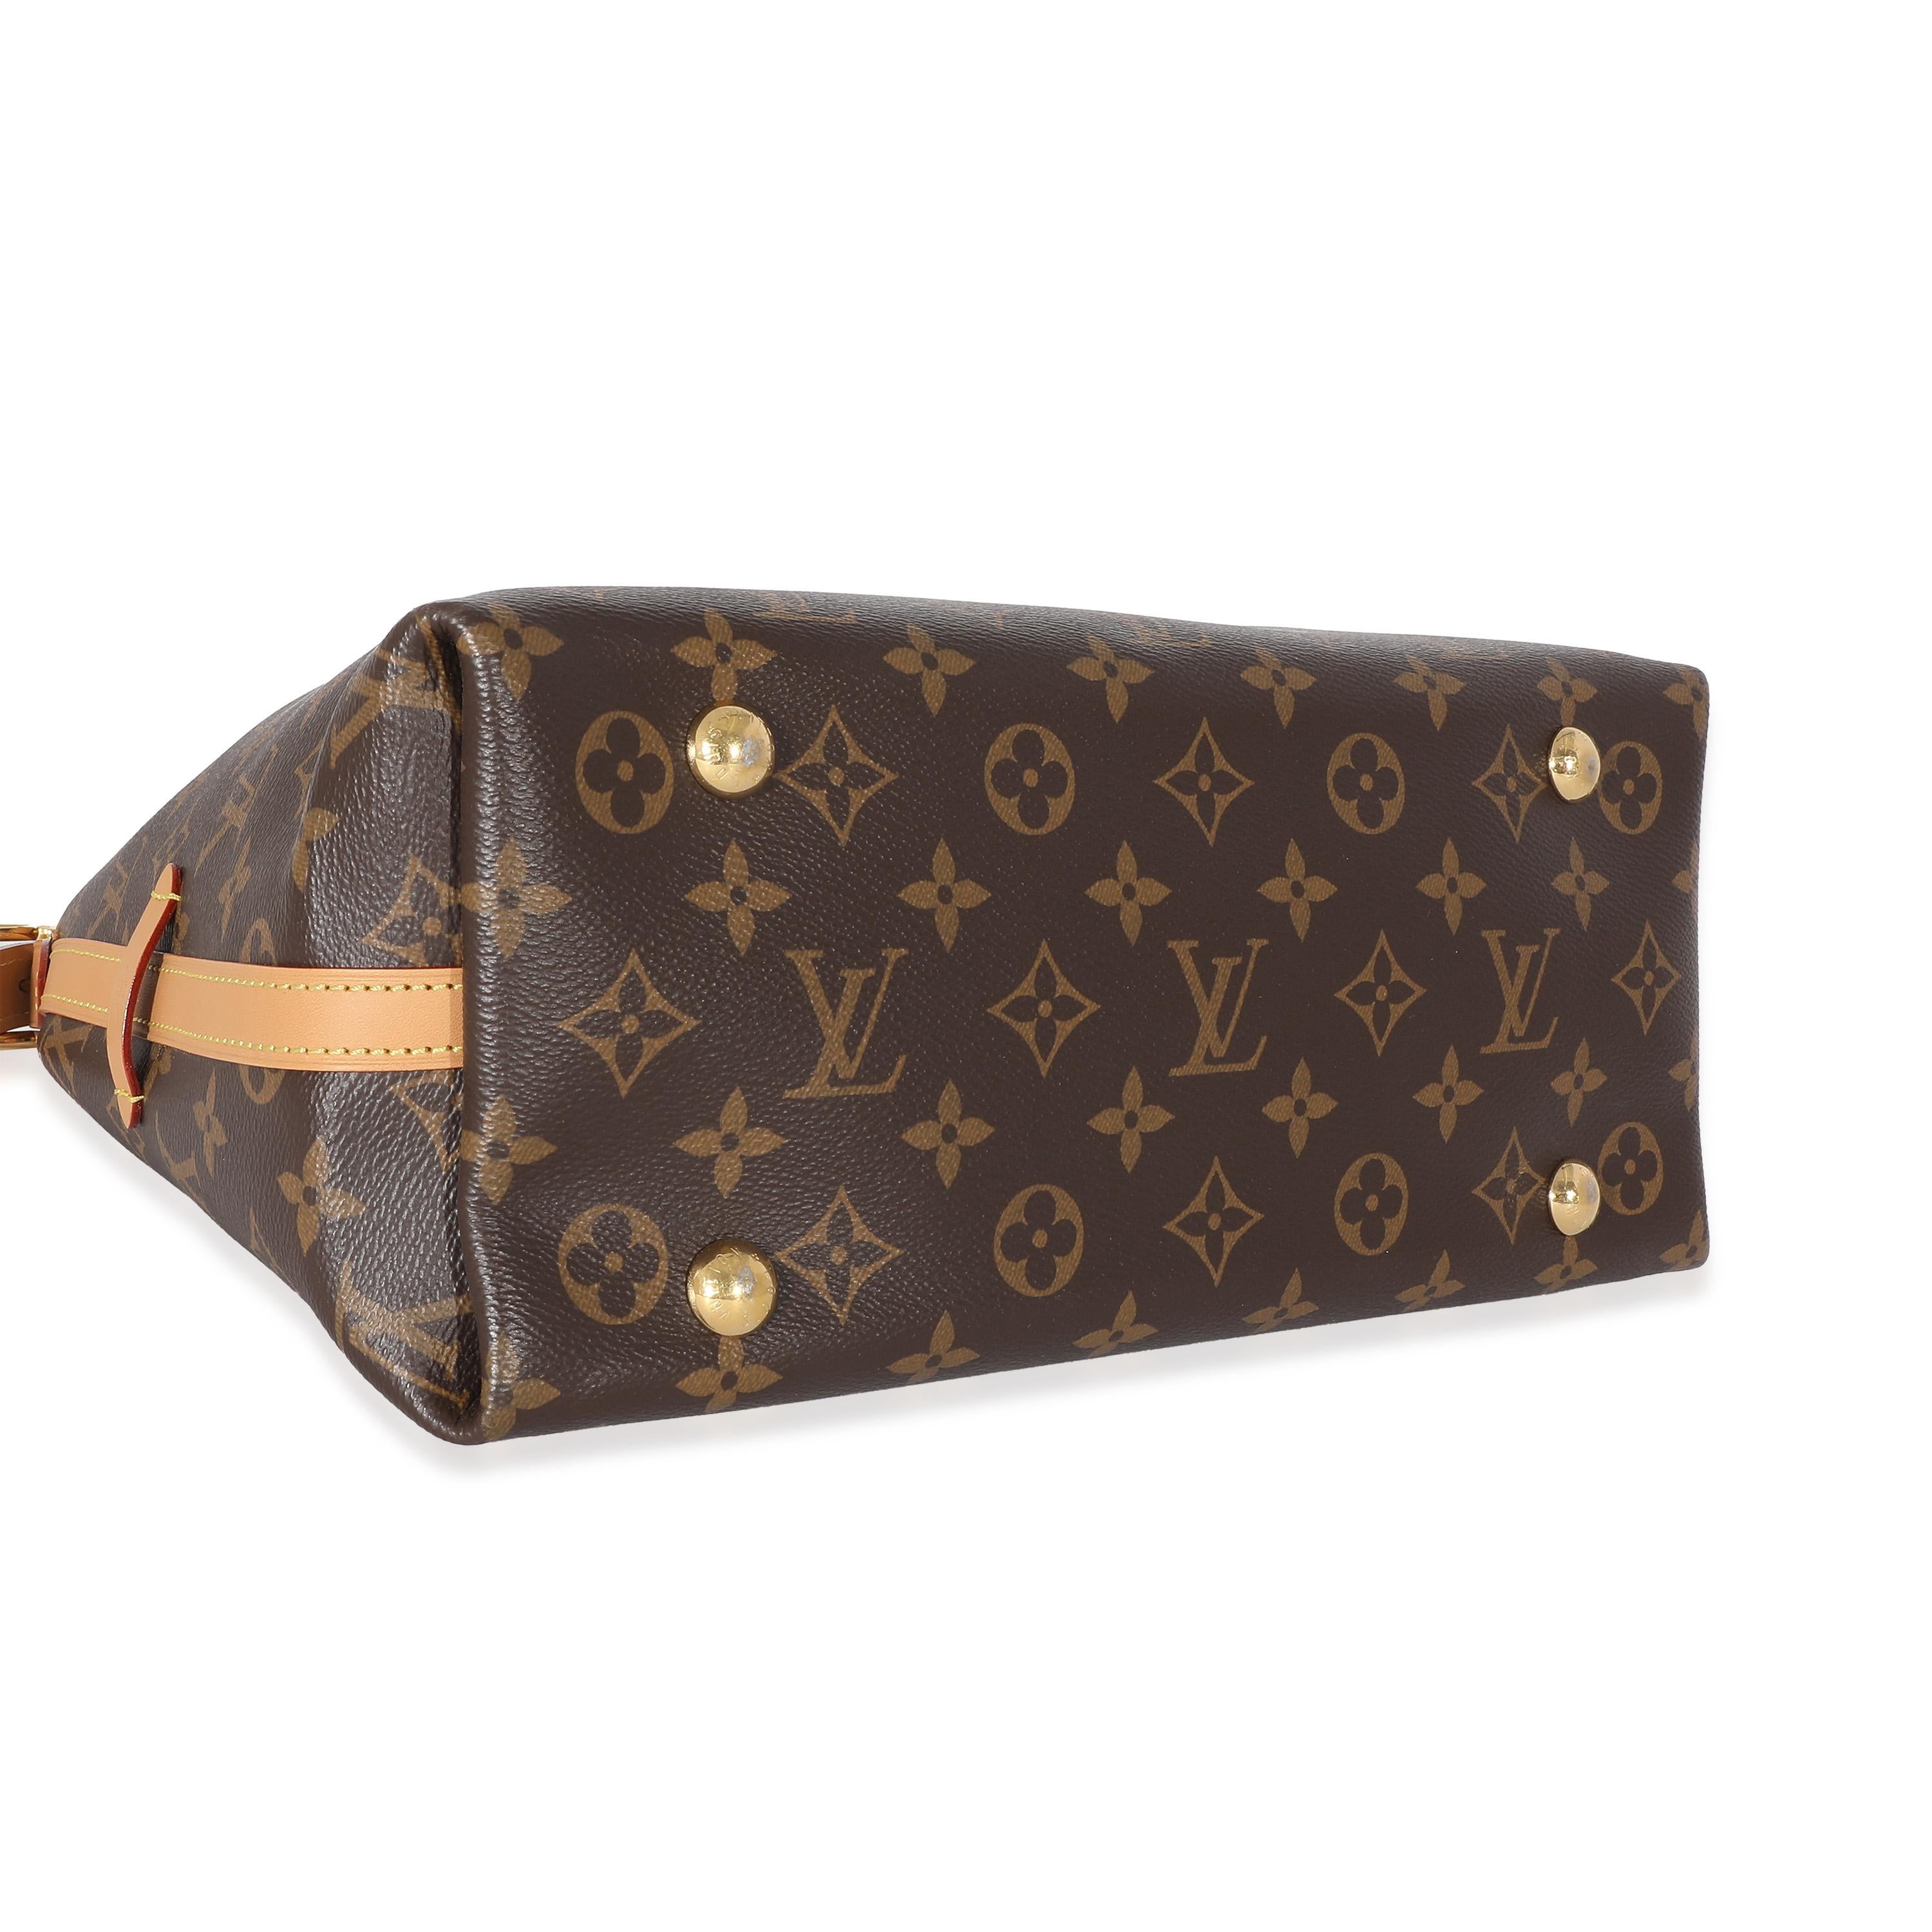 Listing Title: Louis Vuitton Monogram Canvas Carryall PM
SKU: 133250
MSRP: 2370.00 USD
Condition: Pre-owned 
Handbag Condition: Very Good
Condition Comments: Item is in very good condition with minor signs of wear. Exterior faint corner scuffing. 